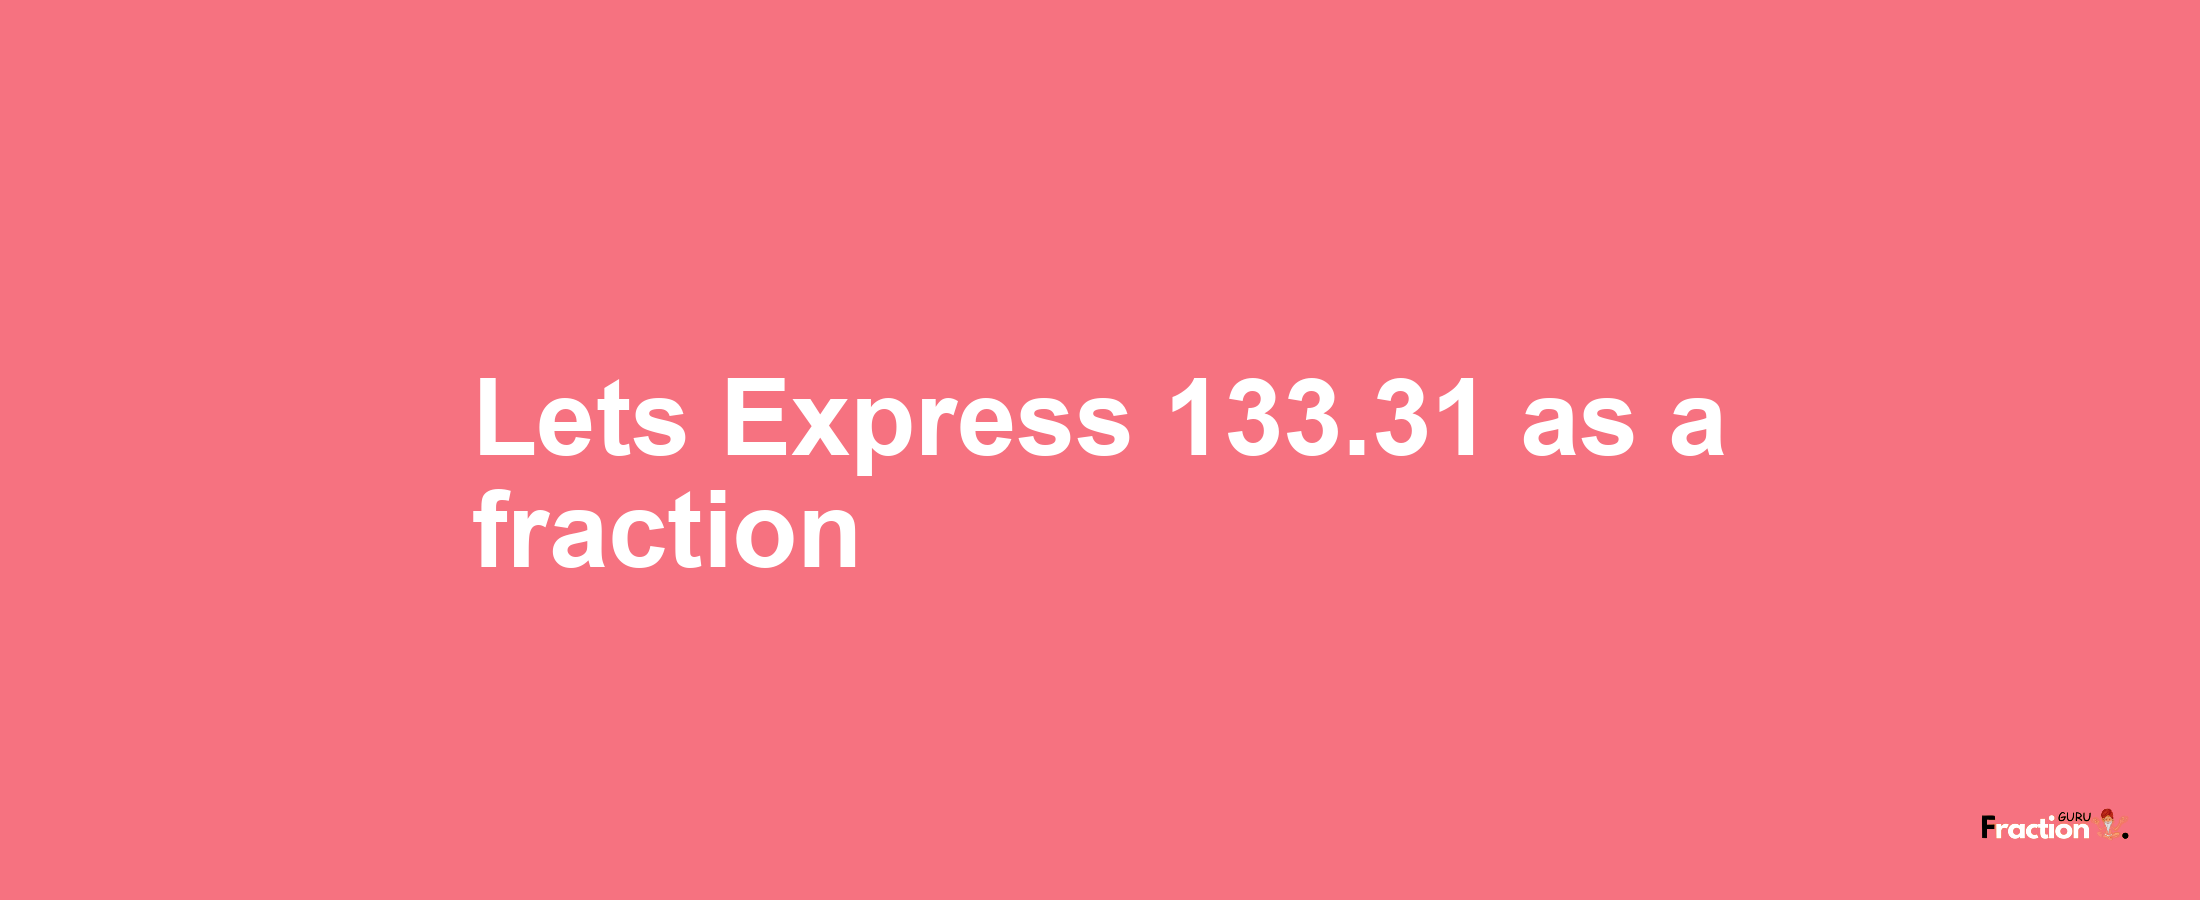 Lets Express 133.31 as afraction